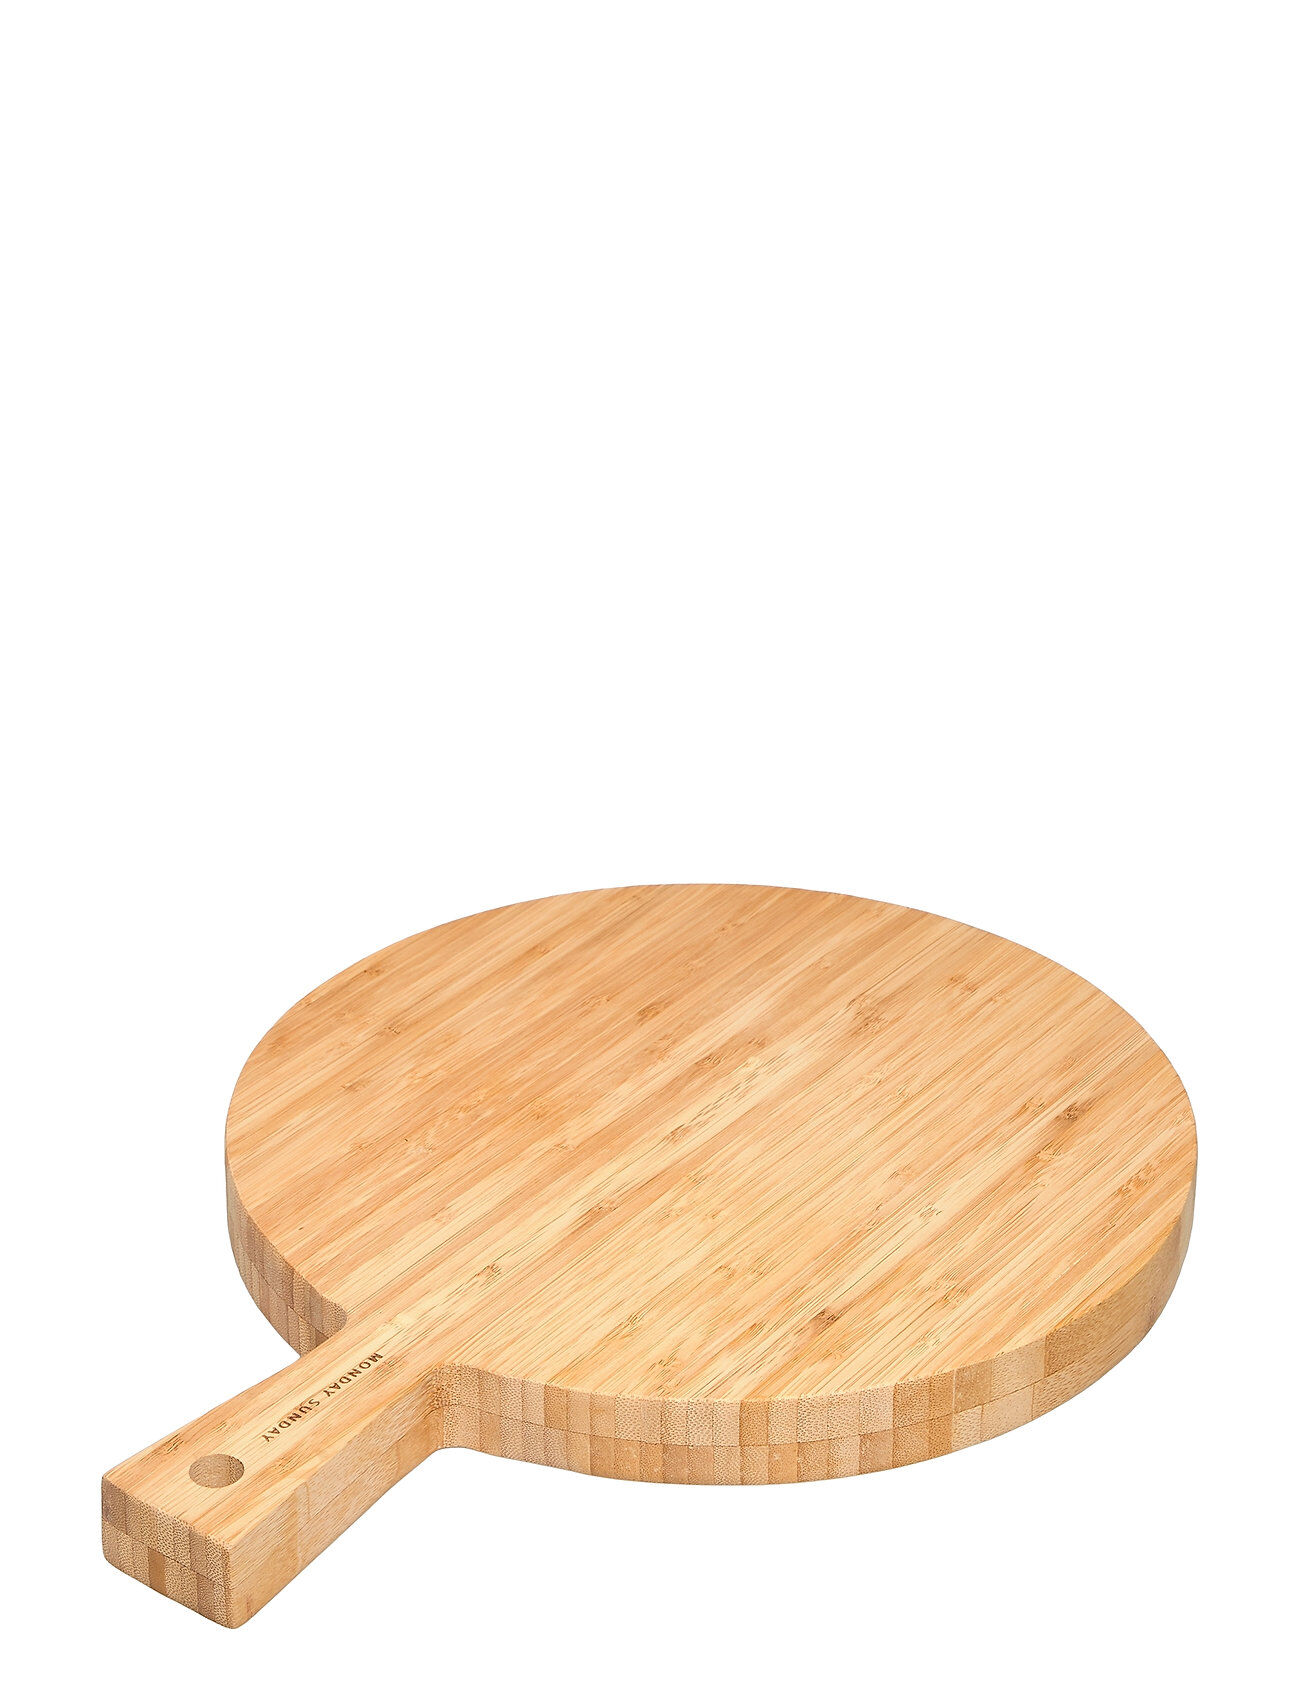 Monday Sunday Gaia Serving Board Home Tableware Serving Dishes Tapas Boards & Sets Brun Monday Sunday